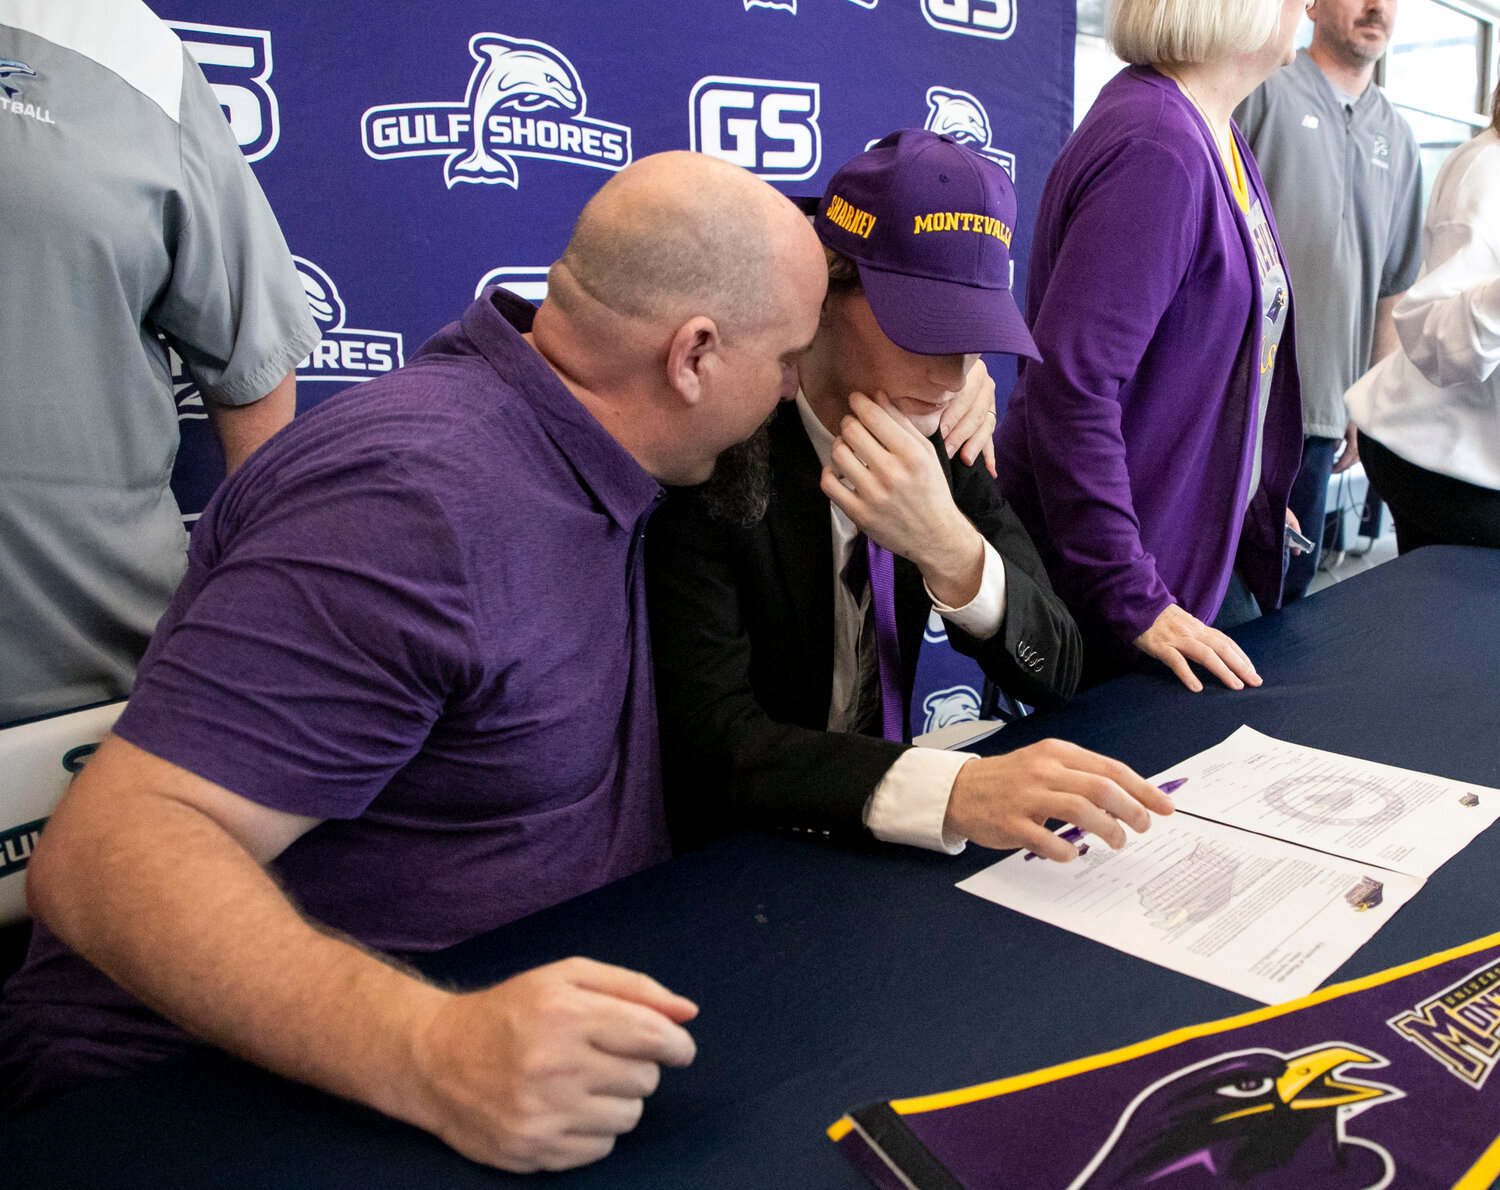 Chad Sharkey shares an embrace with his son Ethan after he cemented his commitment to be a two-sport athlete for the Montevallo Falcons on Wednesday, Jan. 24, following his time with the Gulf Shores Dolphins. Ethan is set to wrestle in the winter and run outdoor track in the spring.